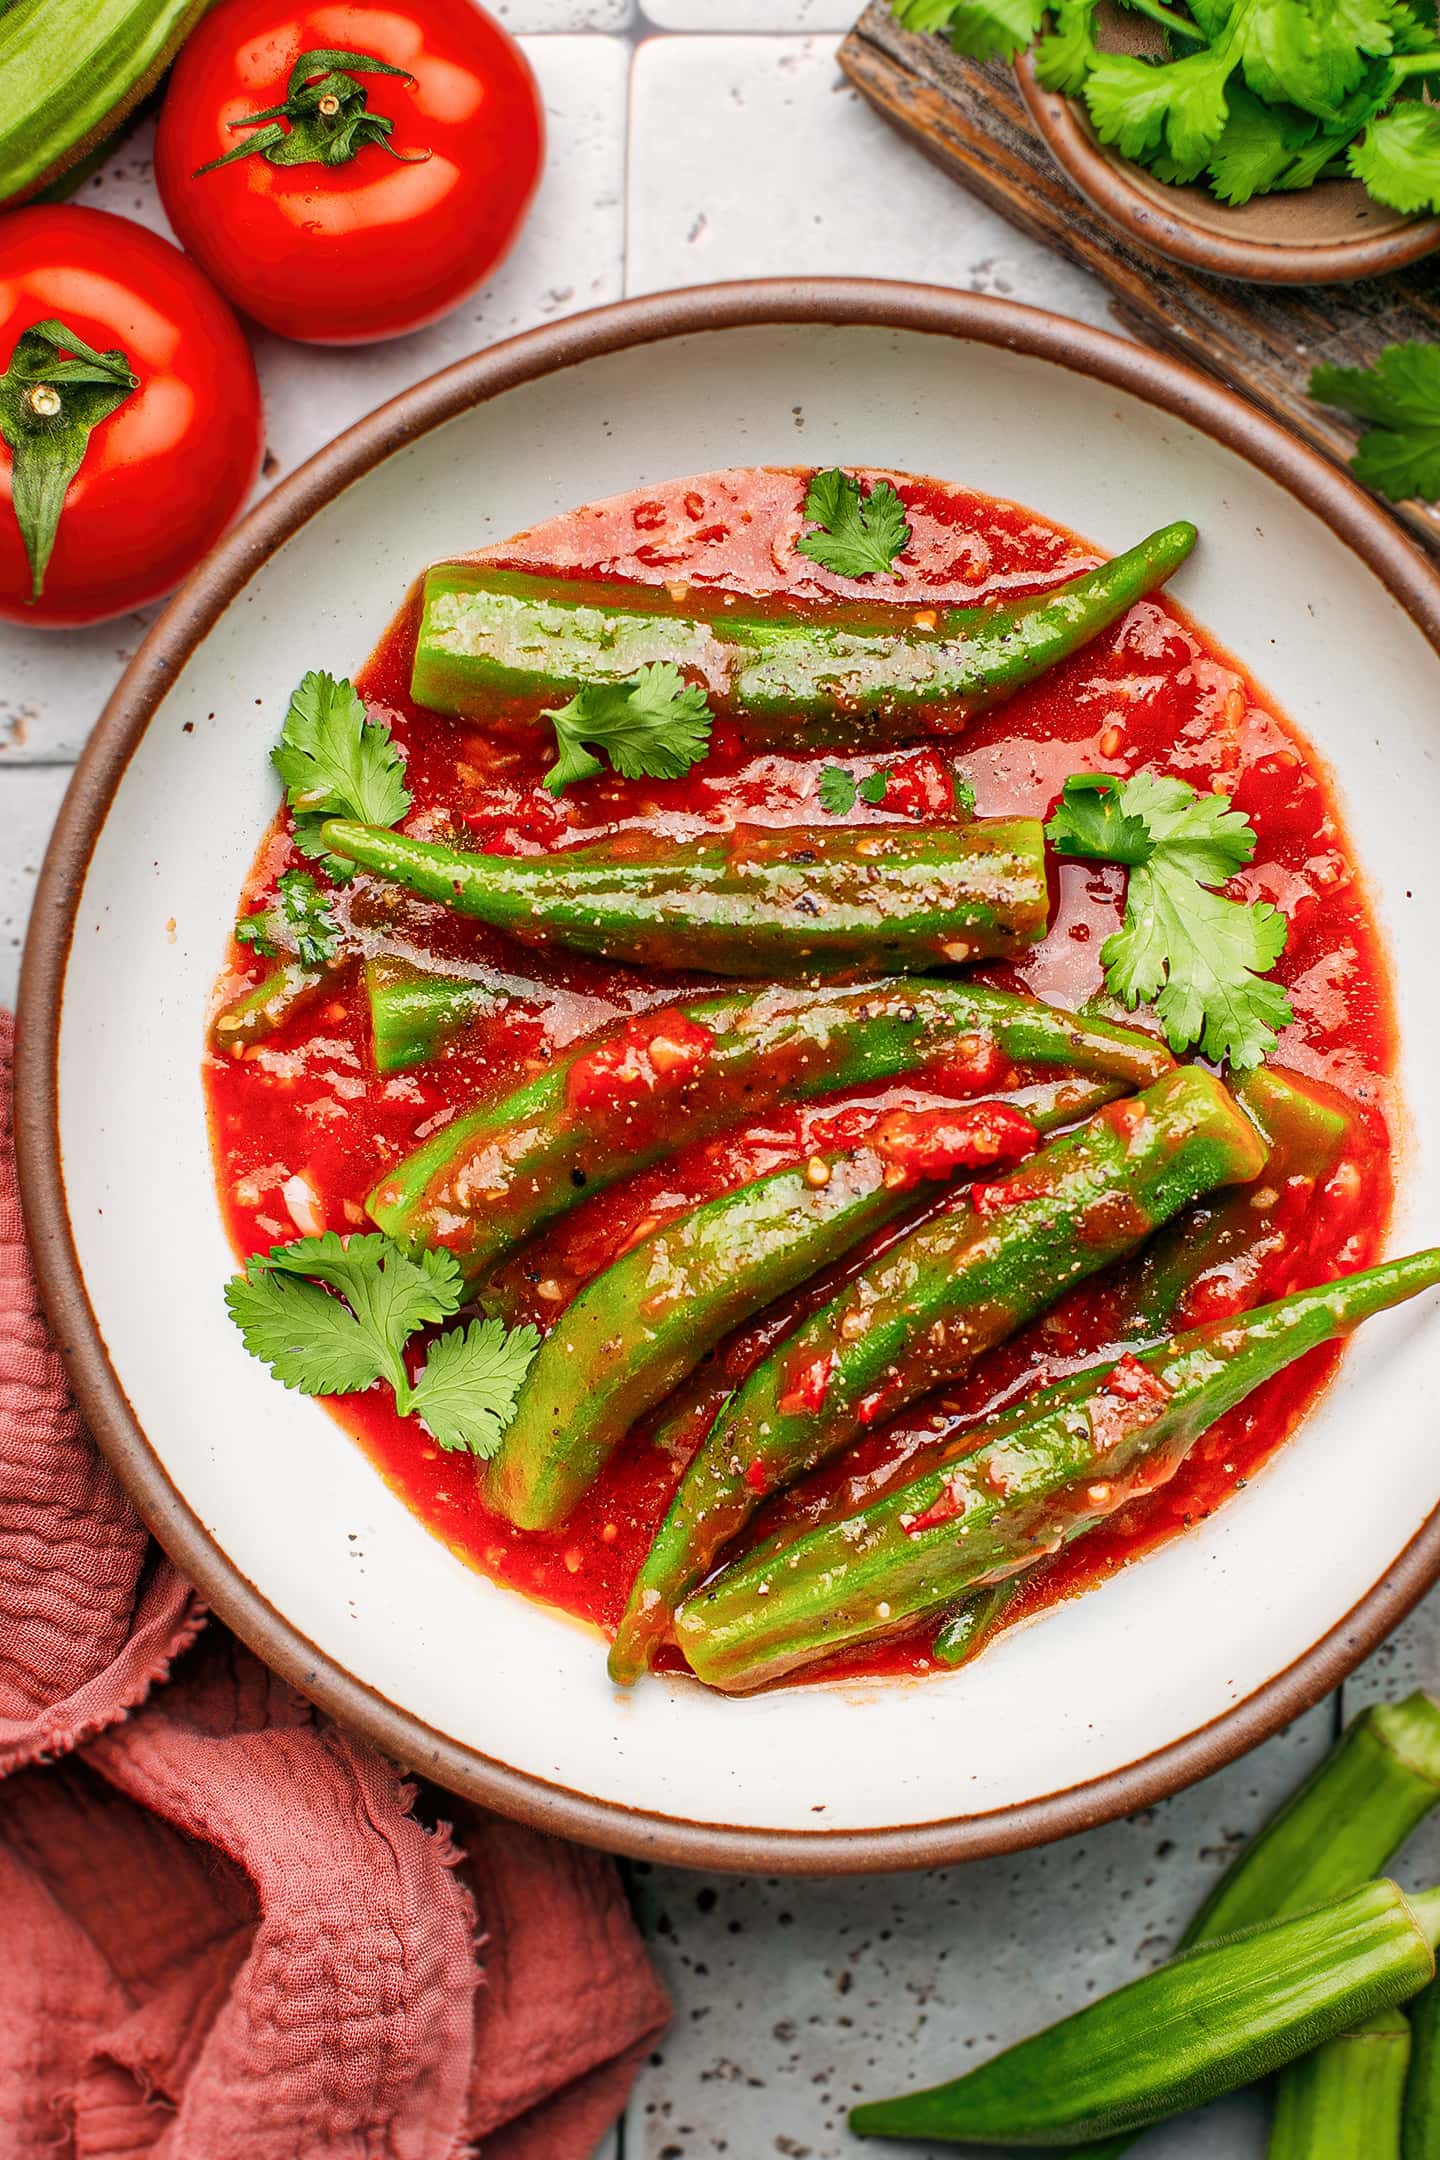 Okra pods in sweet tomato sauce in a bowl.